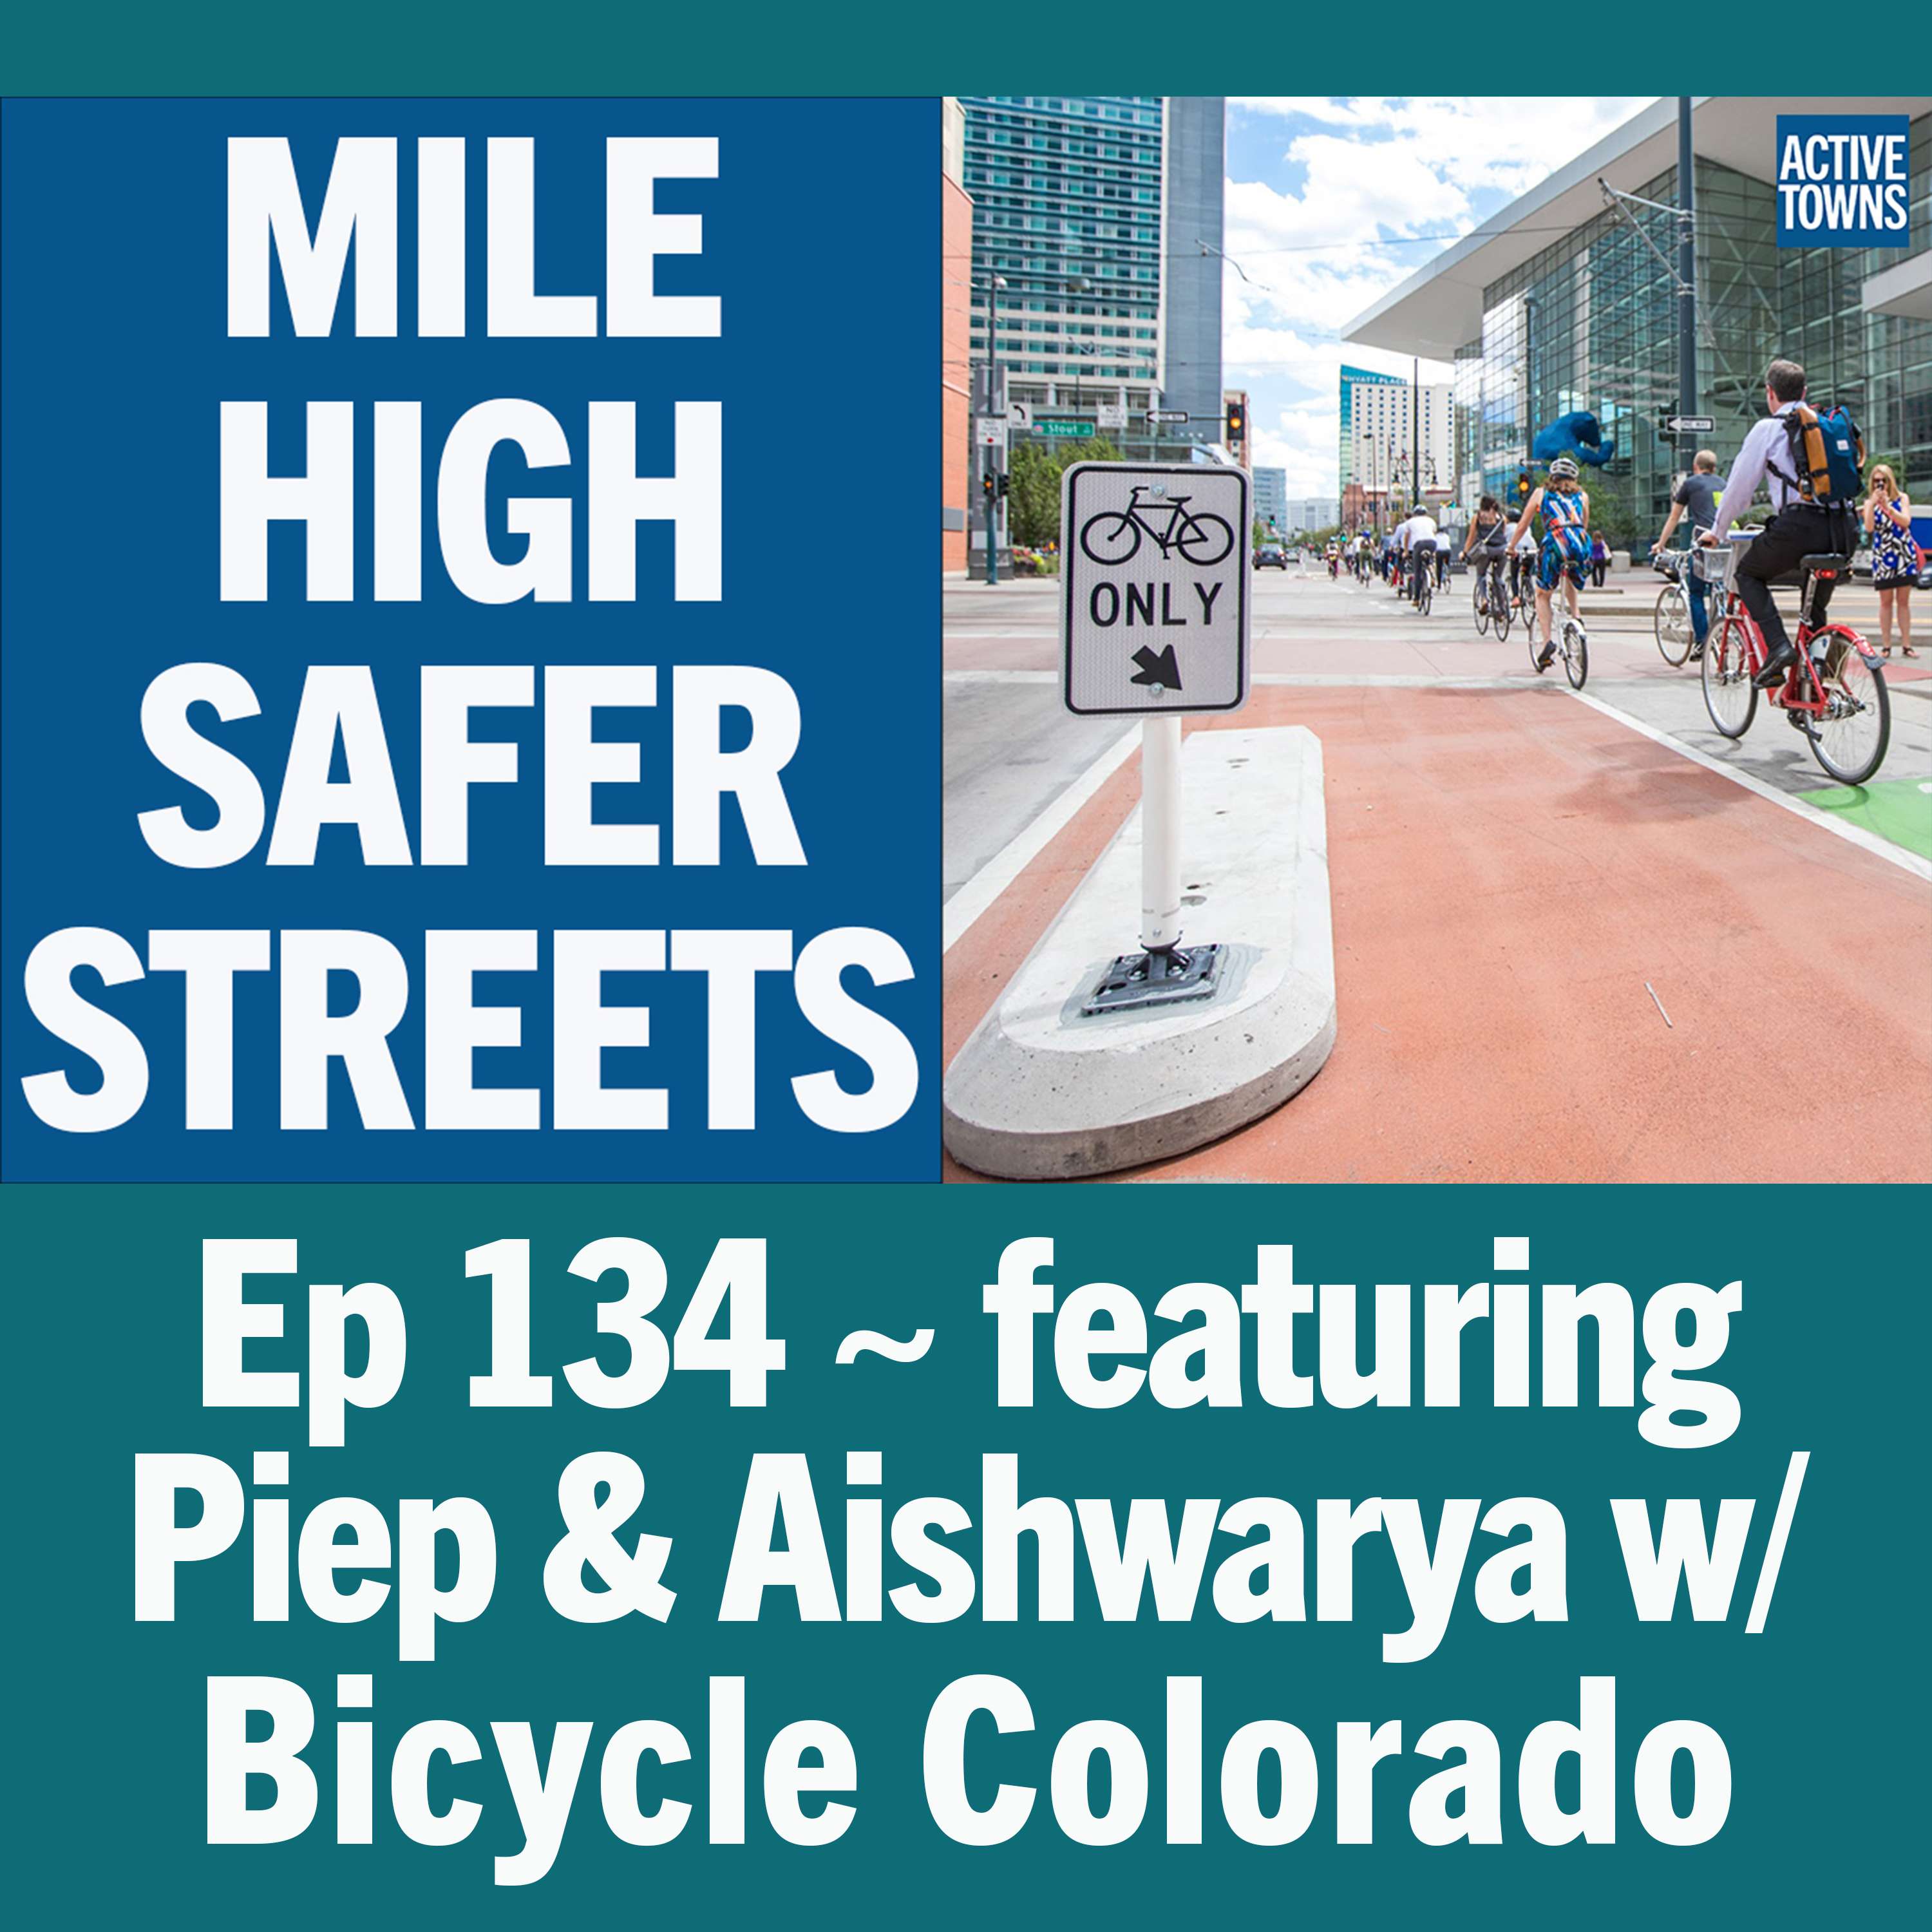 Bicycle Colorado Updates w/ Piep and Aishwarya (video available)